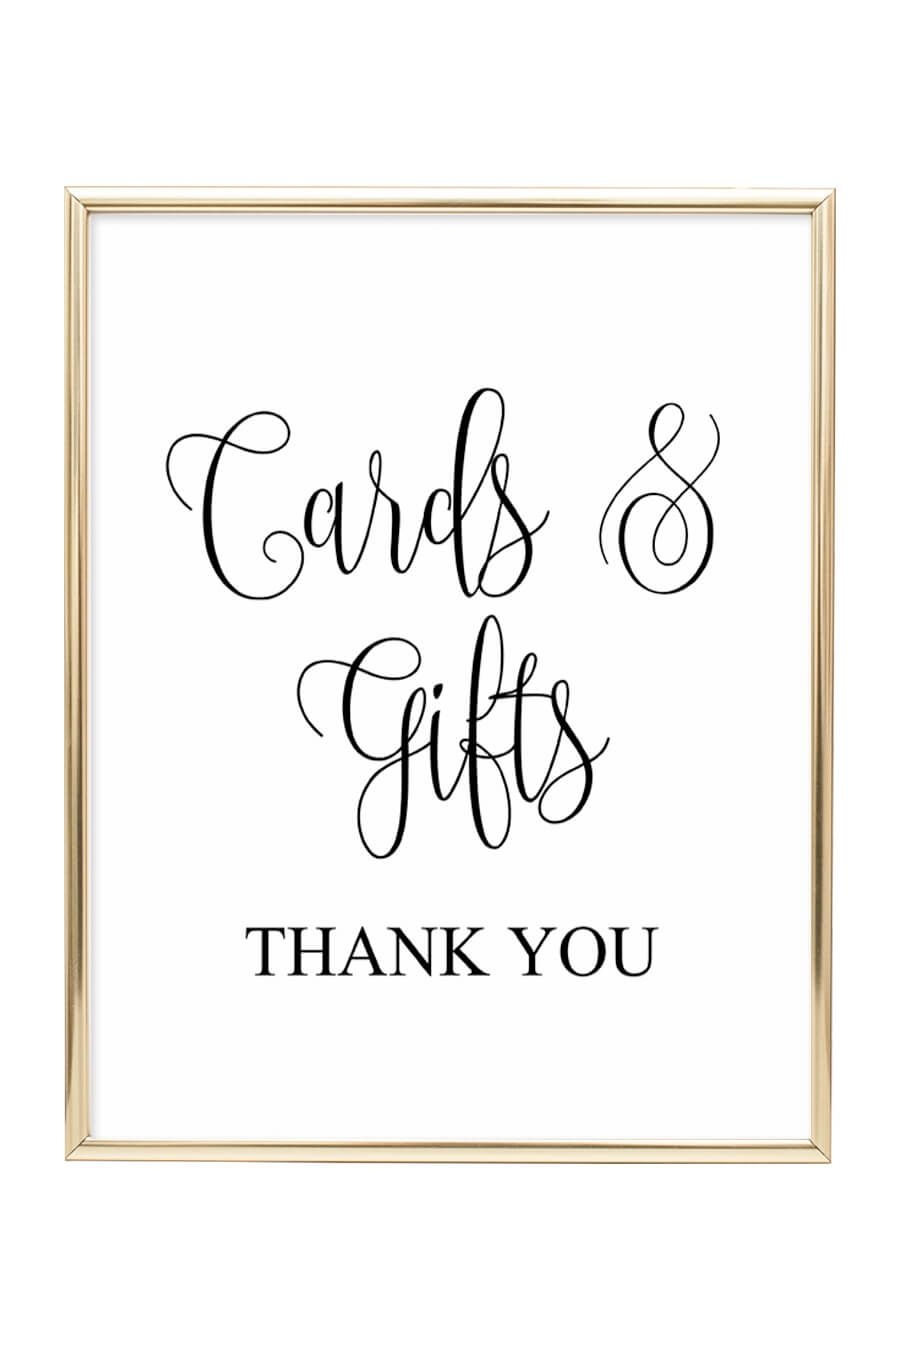 Cards And Gifts Printable Wedding Sign Chicfetti Free Wedding Printables Printable Wedding Sign Cards Sign Wedding